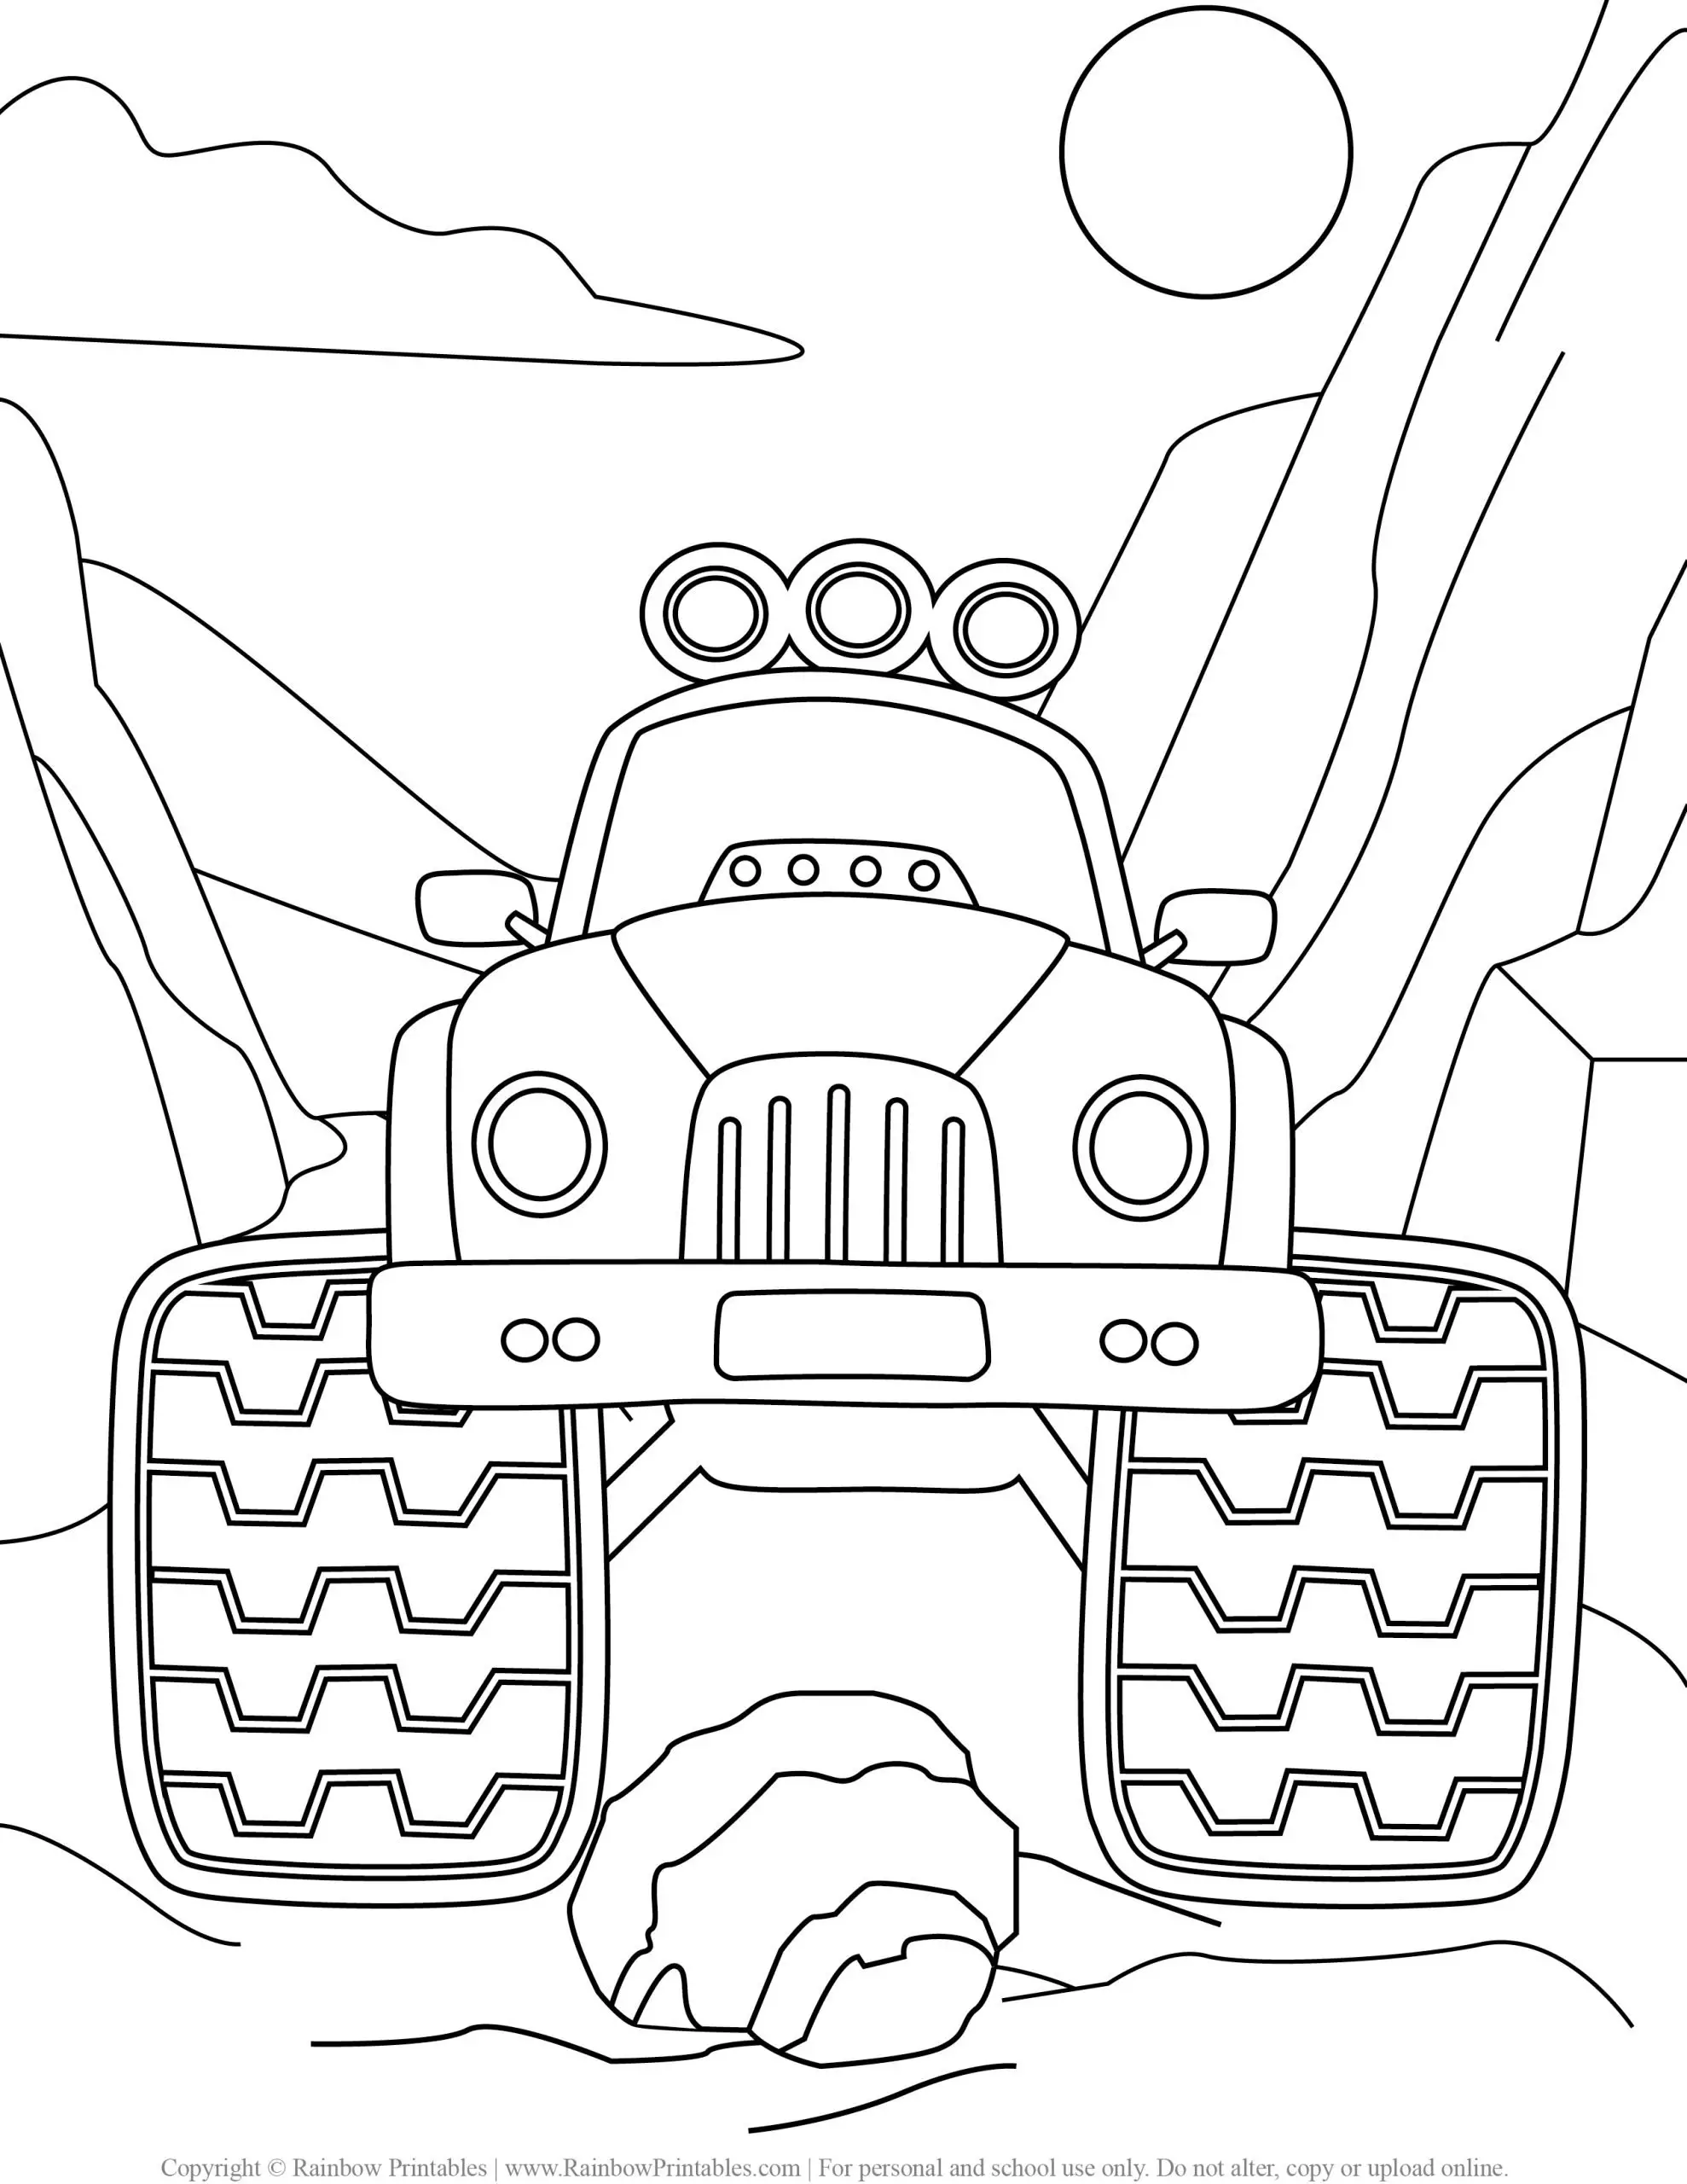 Monster Truck coloring pages, hot wheels, grave digger, jam, games drawing, monster truck party madness, coloring pages for boys, logo, USA America illustratio